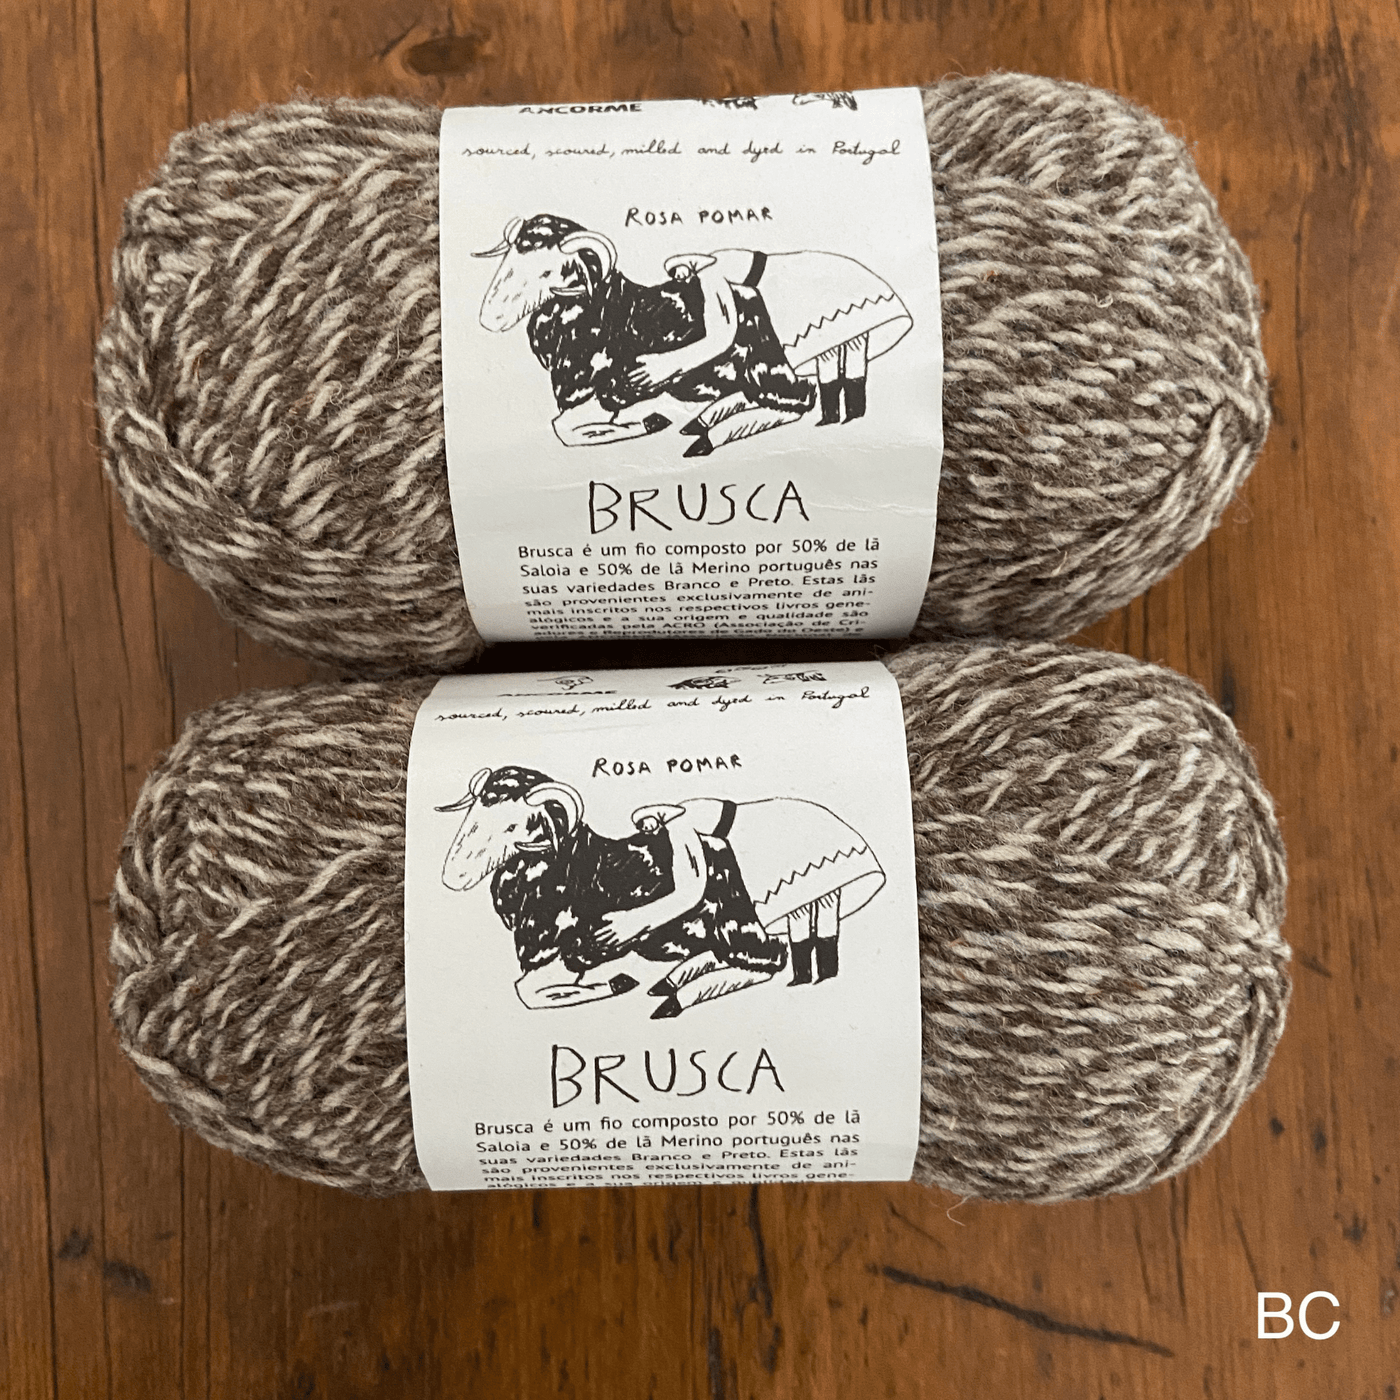 The Woolly Thistle Retrosaria Brusca DK Yarn in BC (brown and white)